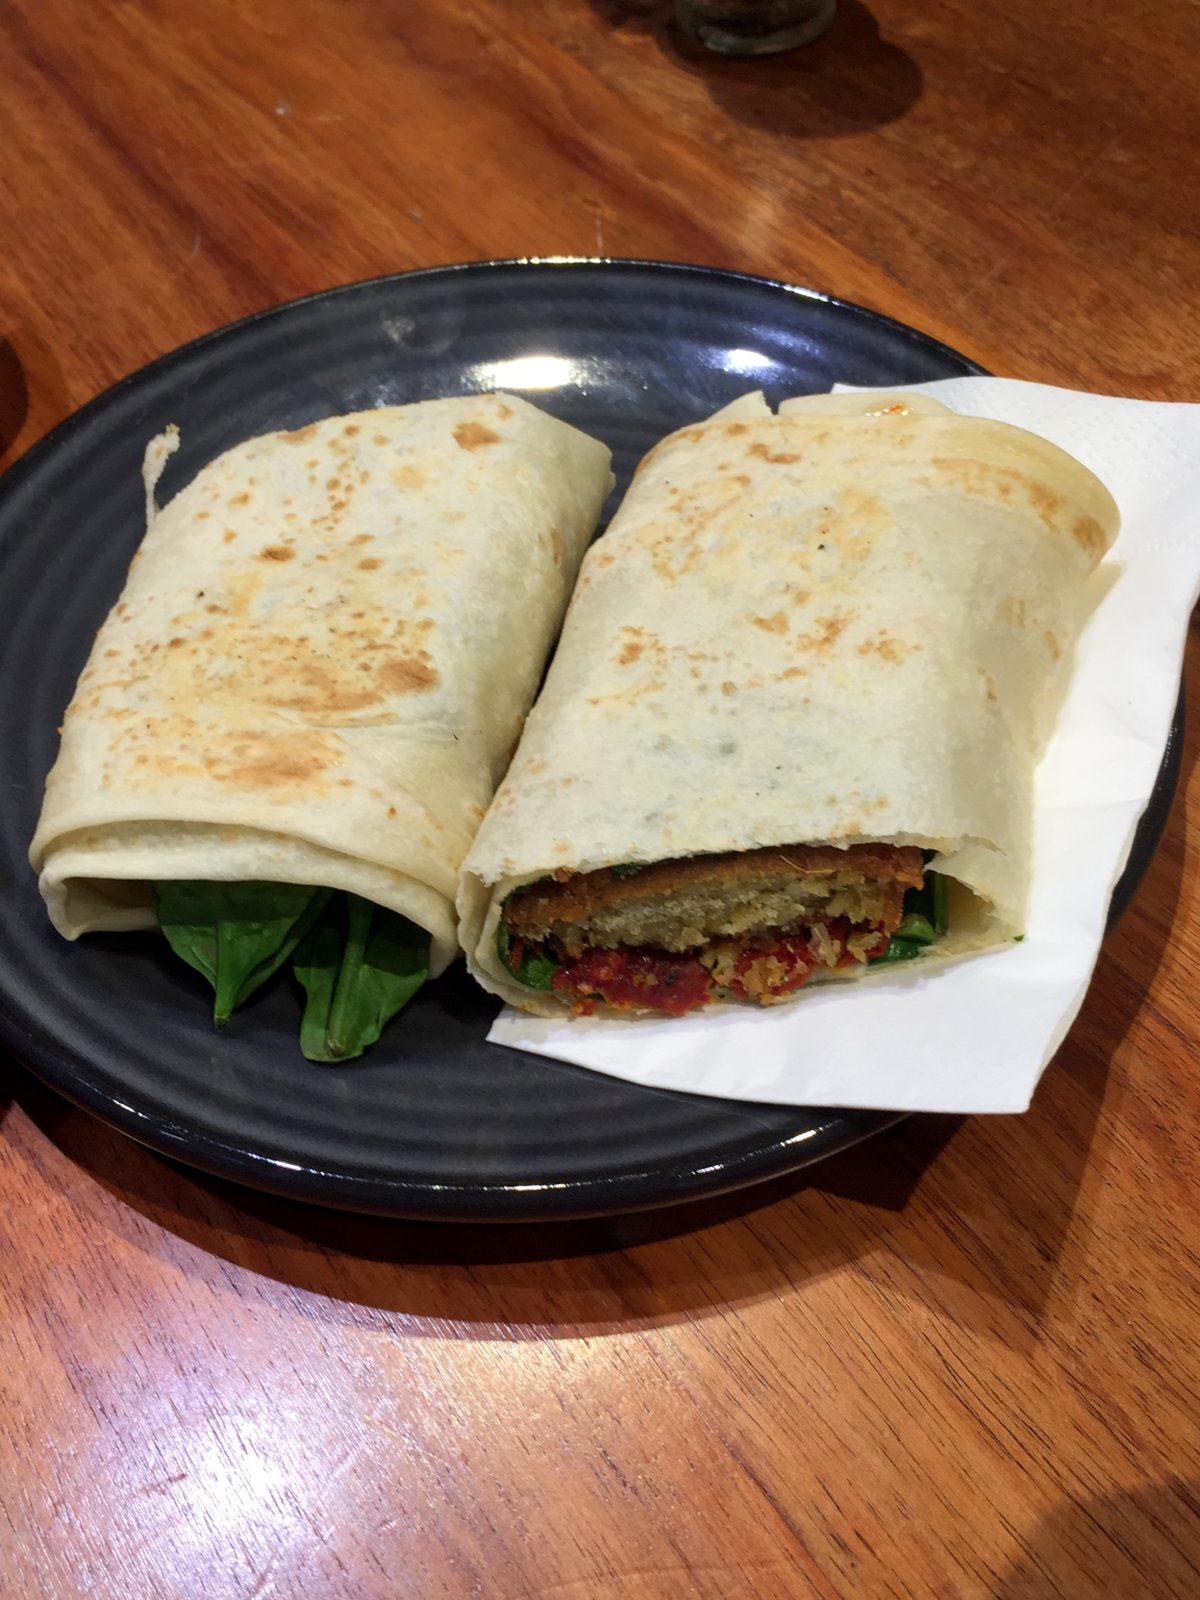 Falafel roti with spinach, hummus, avocado, sundried tomatoes and mint